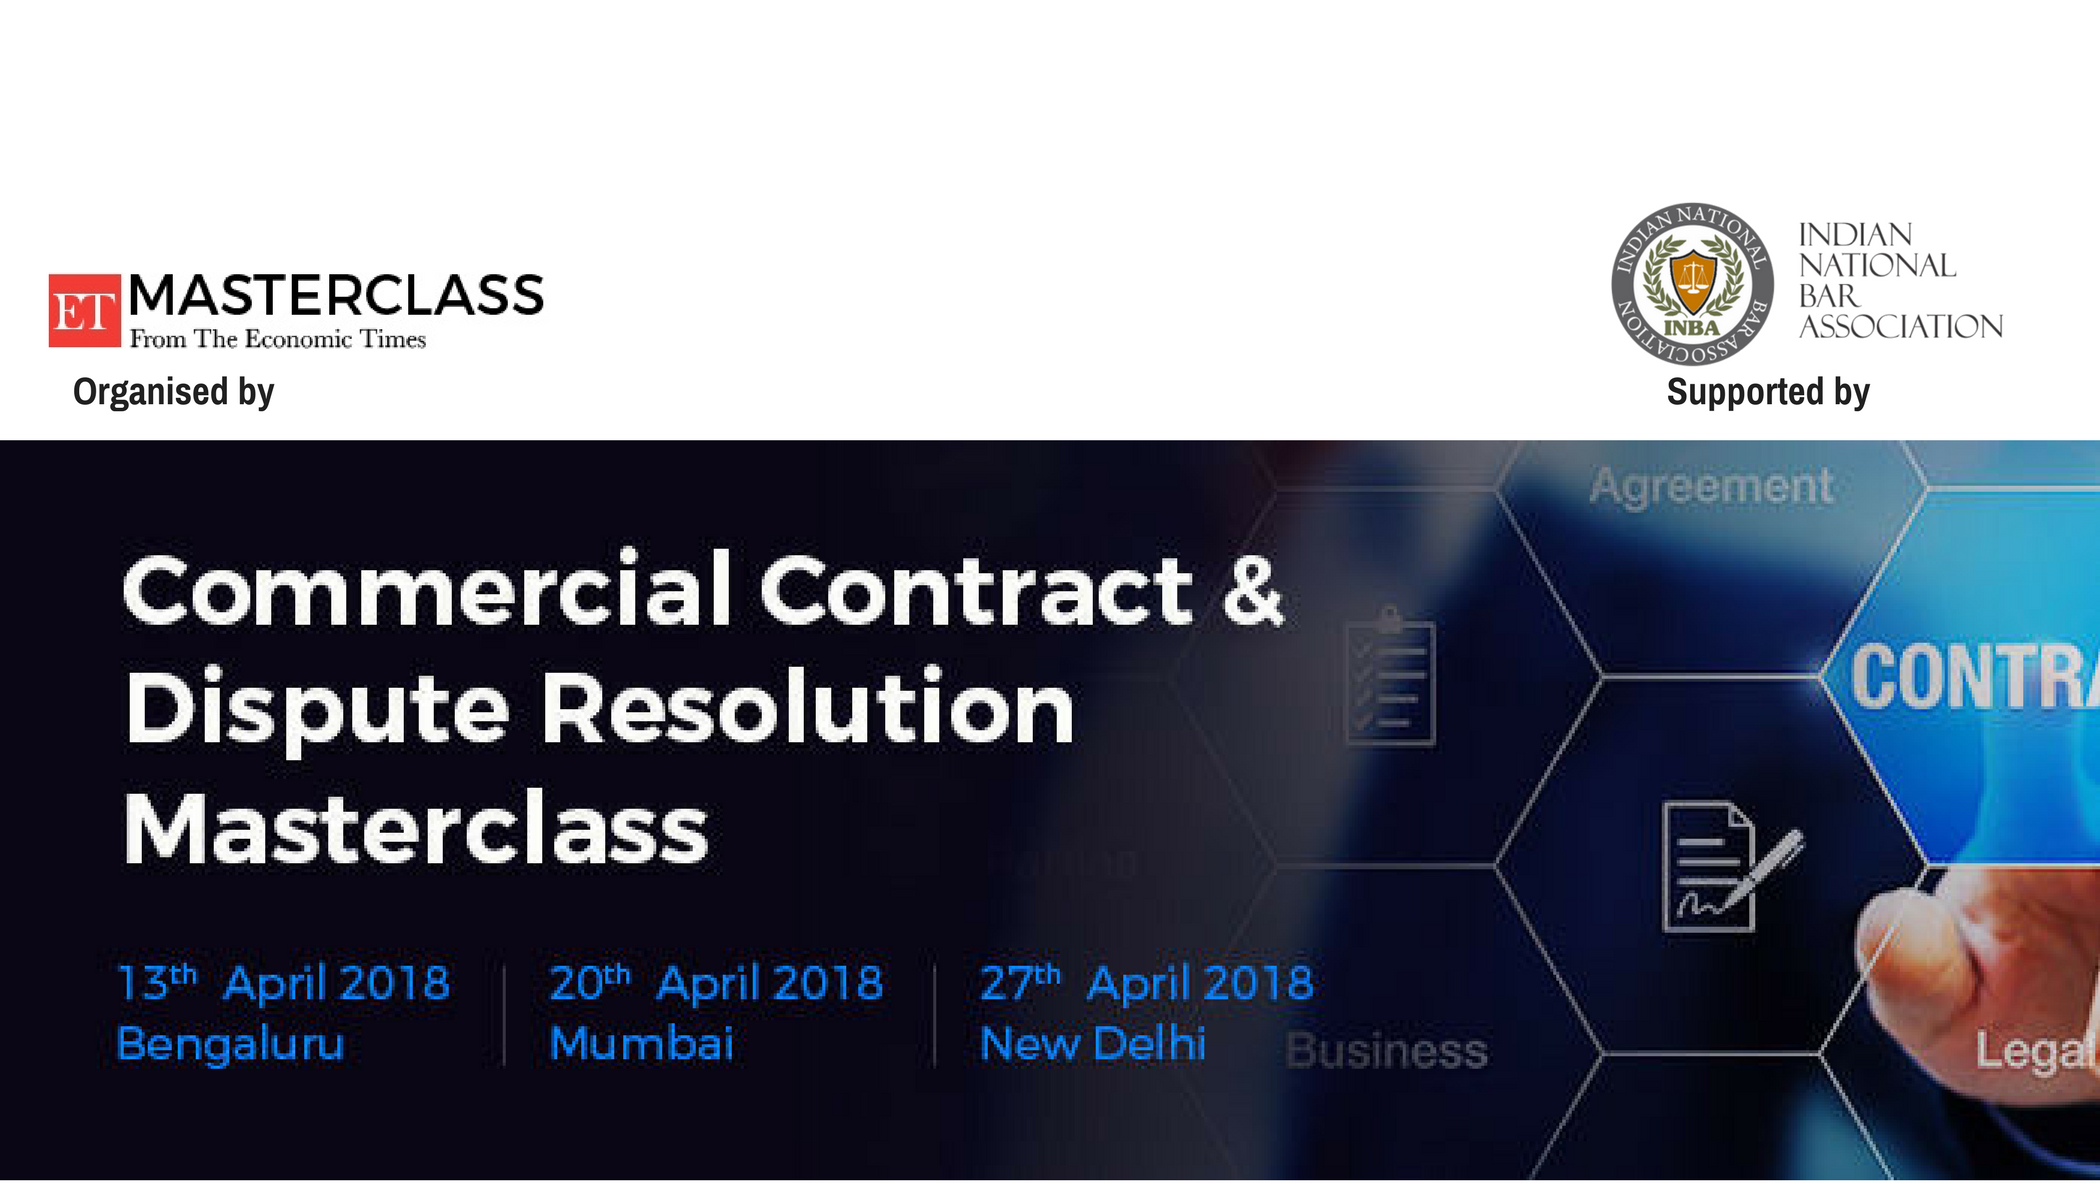 INBA is happy to support ET Masterclass for the upcoming workshop on ‘Commercial Contract & Dispute Resolution’